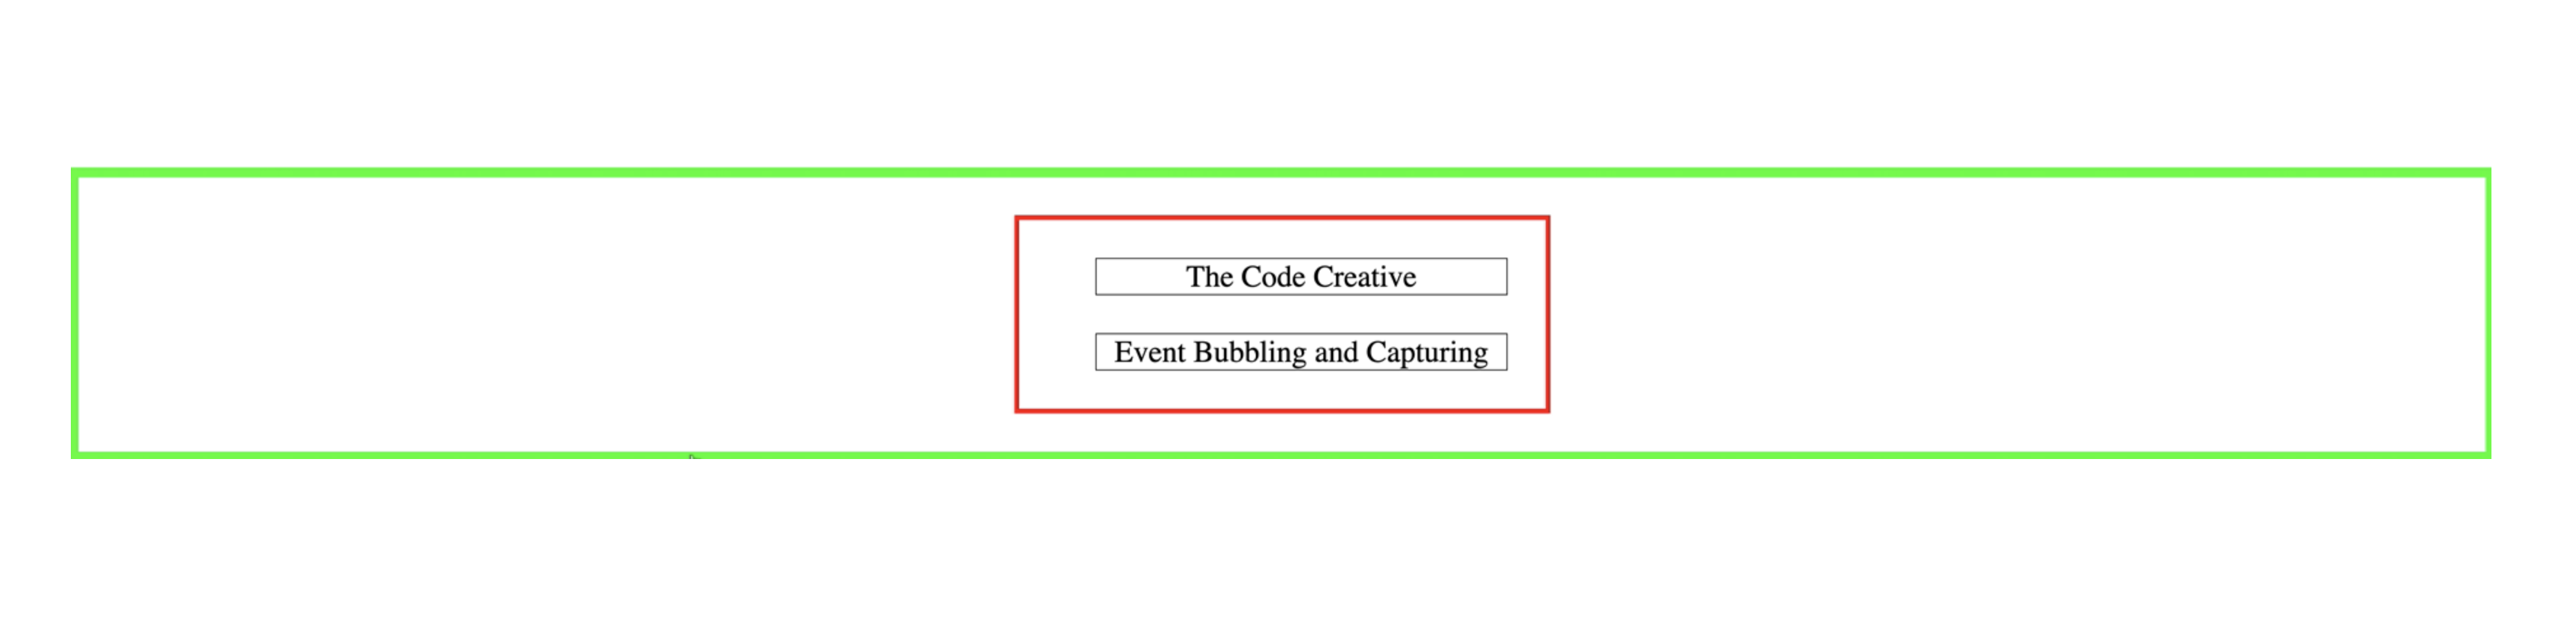 The HTML elements used in this JavaScript event bubbling and capturing tutorial